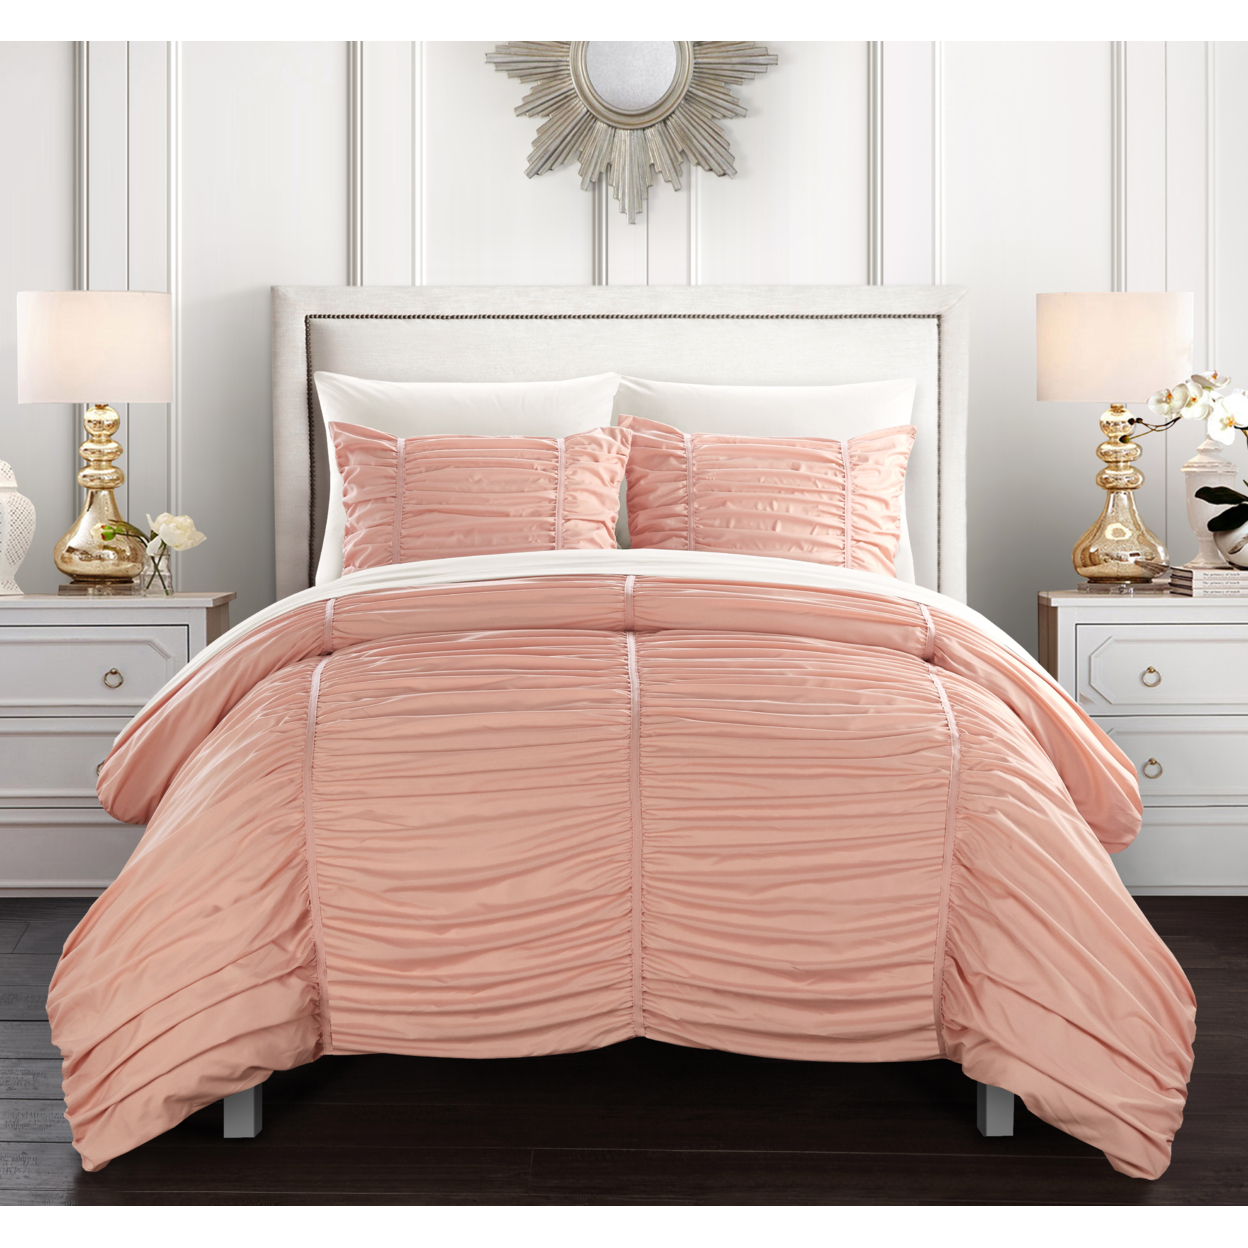 Kiela 2 Pc Or 3 Pc Ruched Comforter Set - Coral, Queen